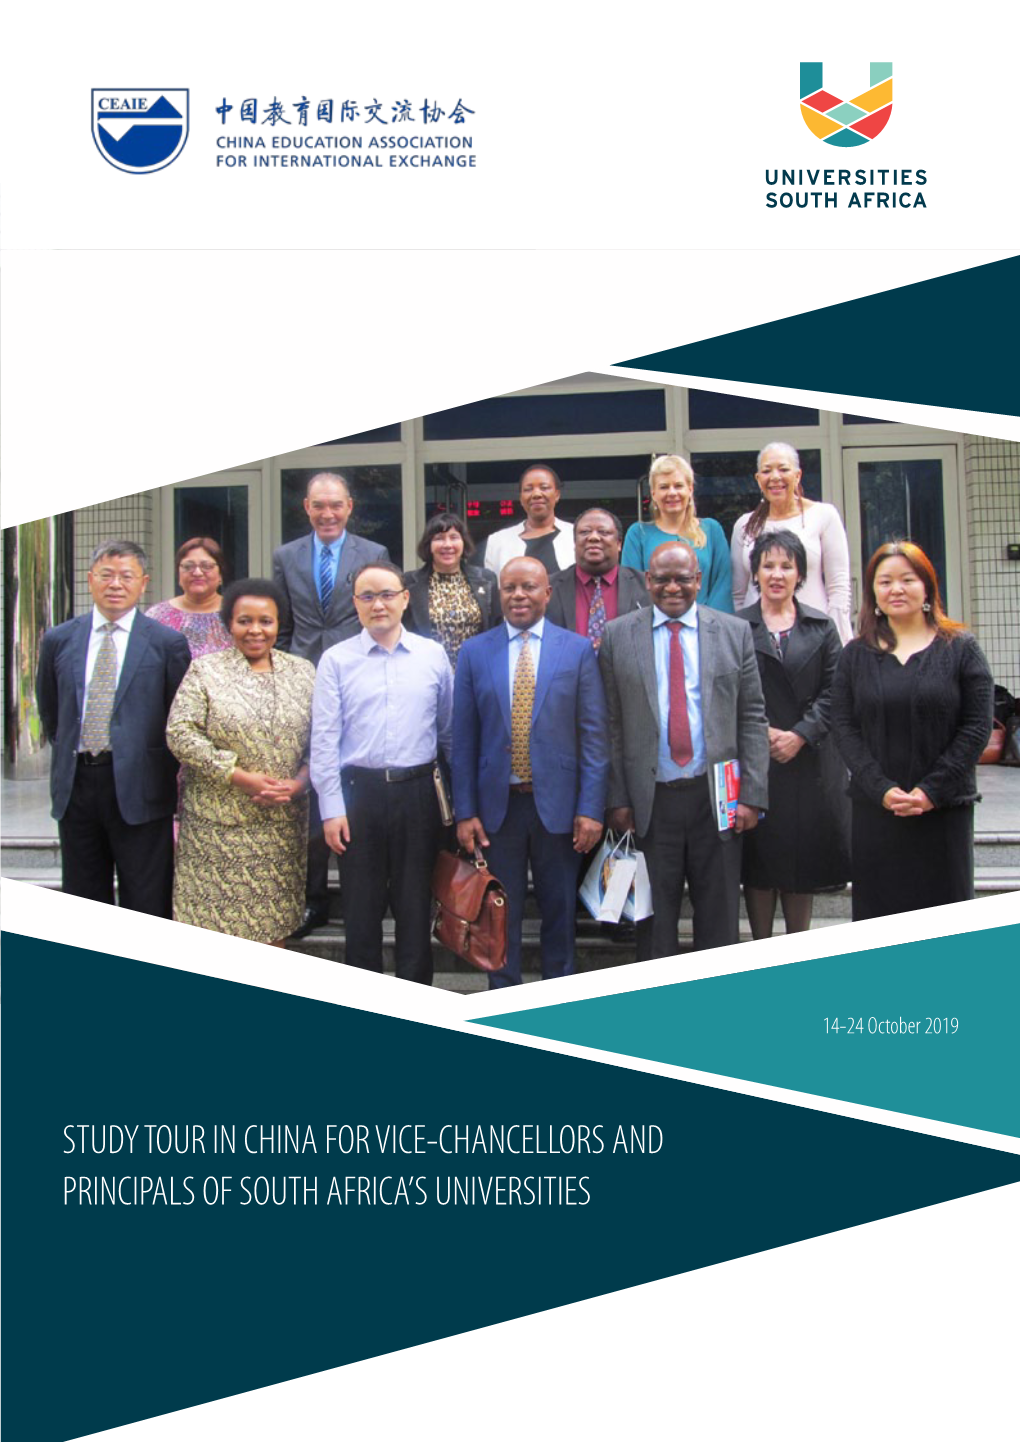 Study Tour in China for Vice-Chancellors and Principals of South Africa's Universities